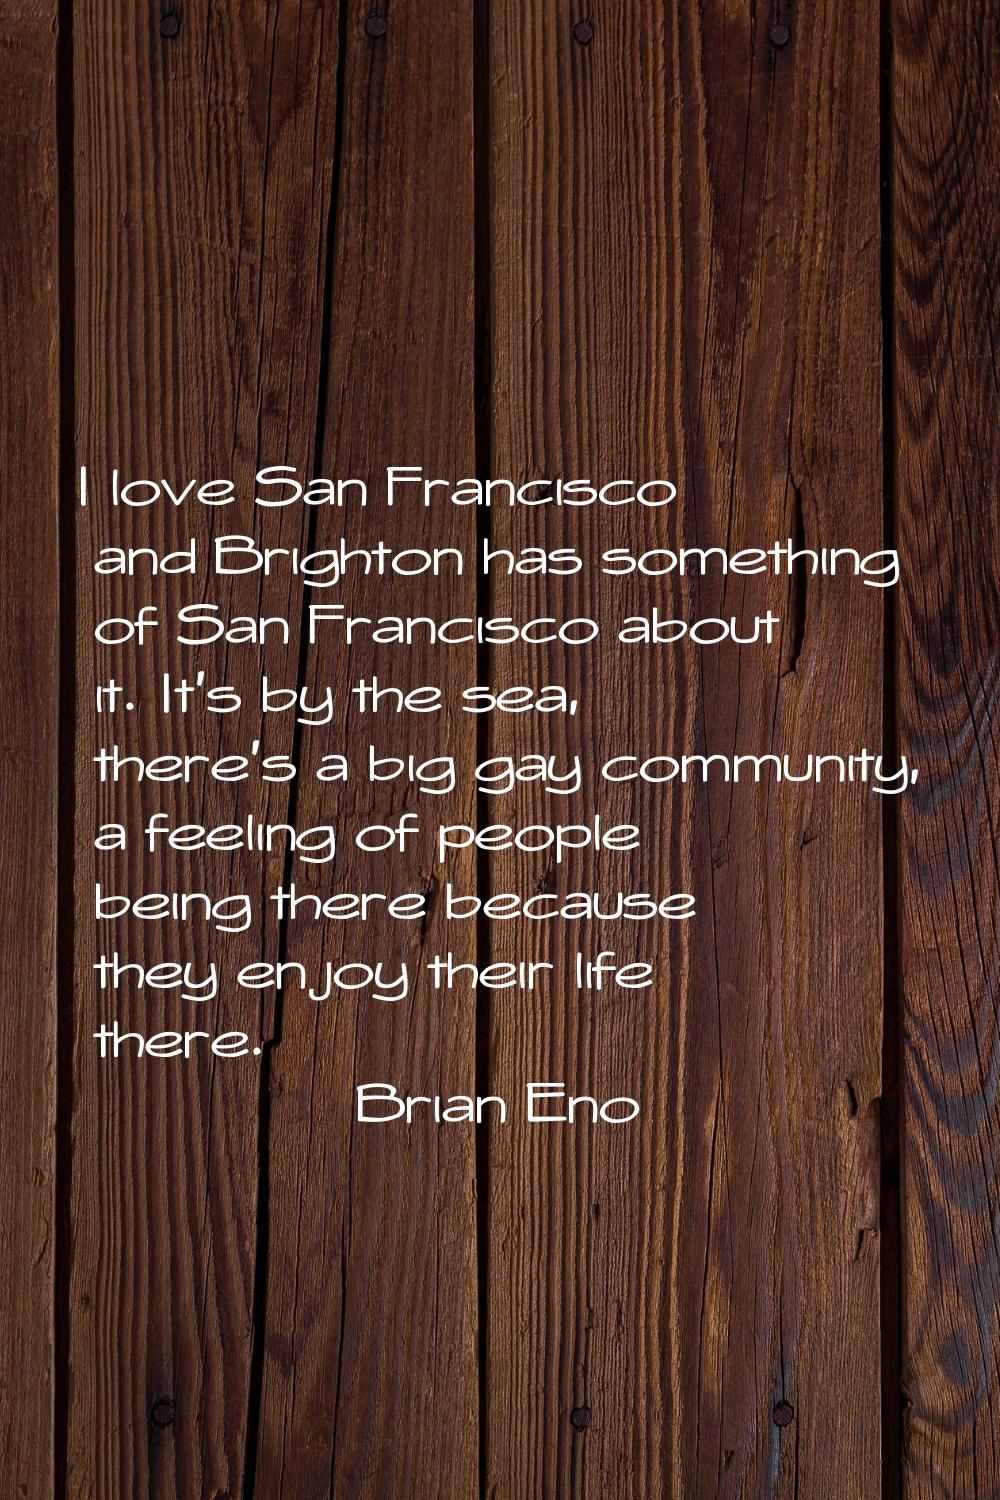 I love San Francisco and Brighton has something of San Francisco about it. It's by the sea, there's